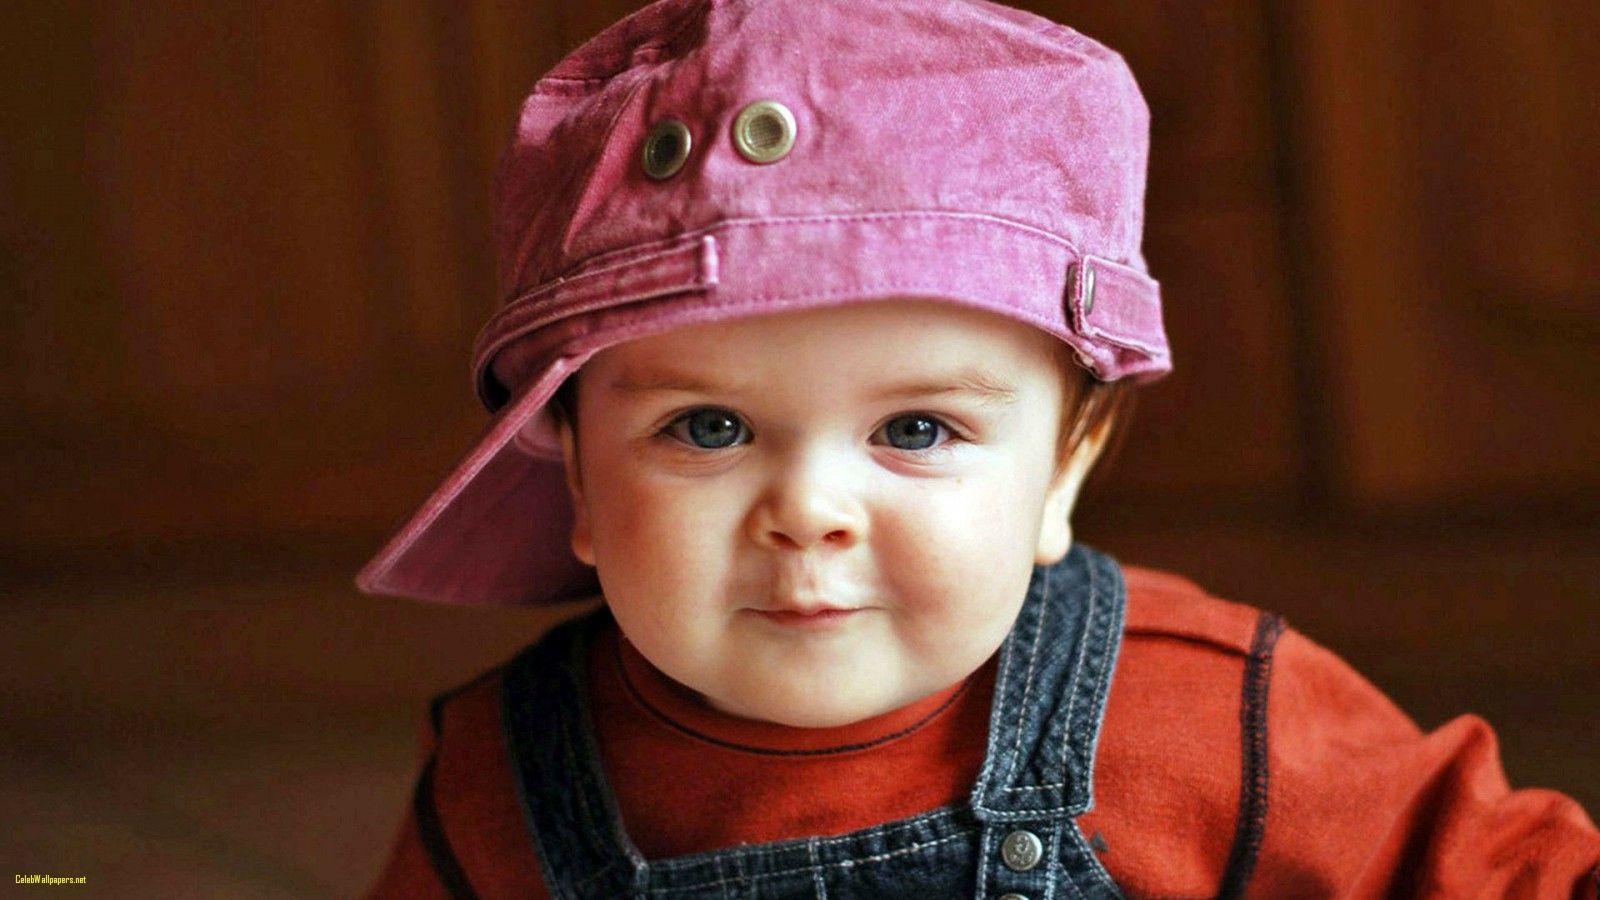 Cute Babies Image Free Download Awesome Cute Baby Boy HD Wallpaper